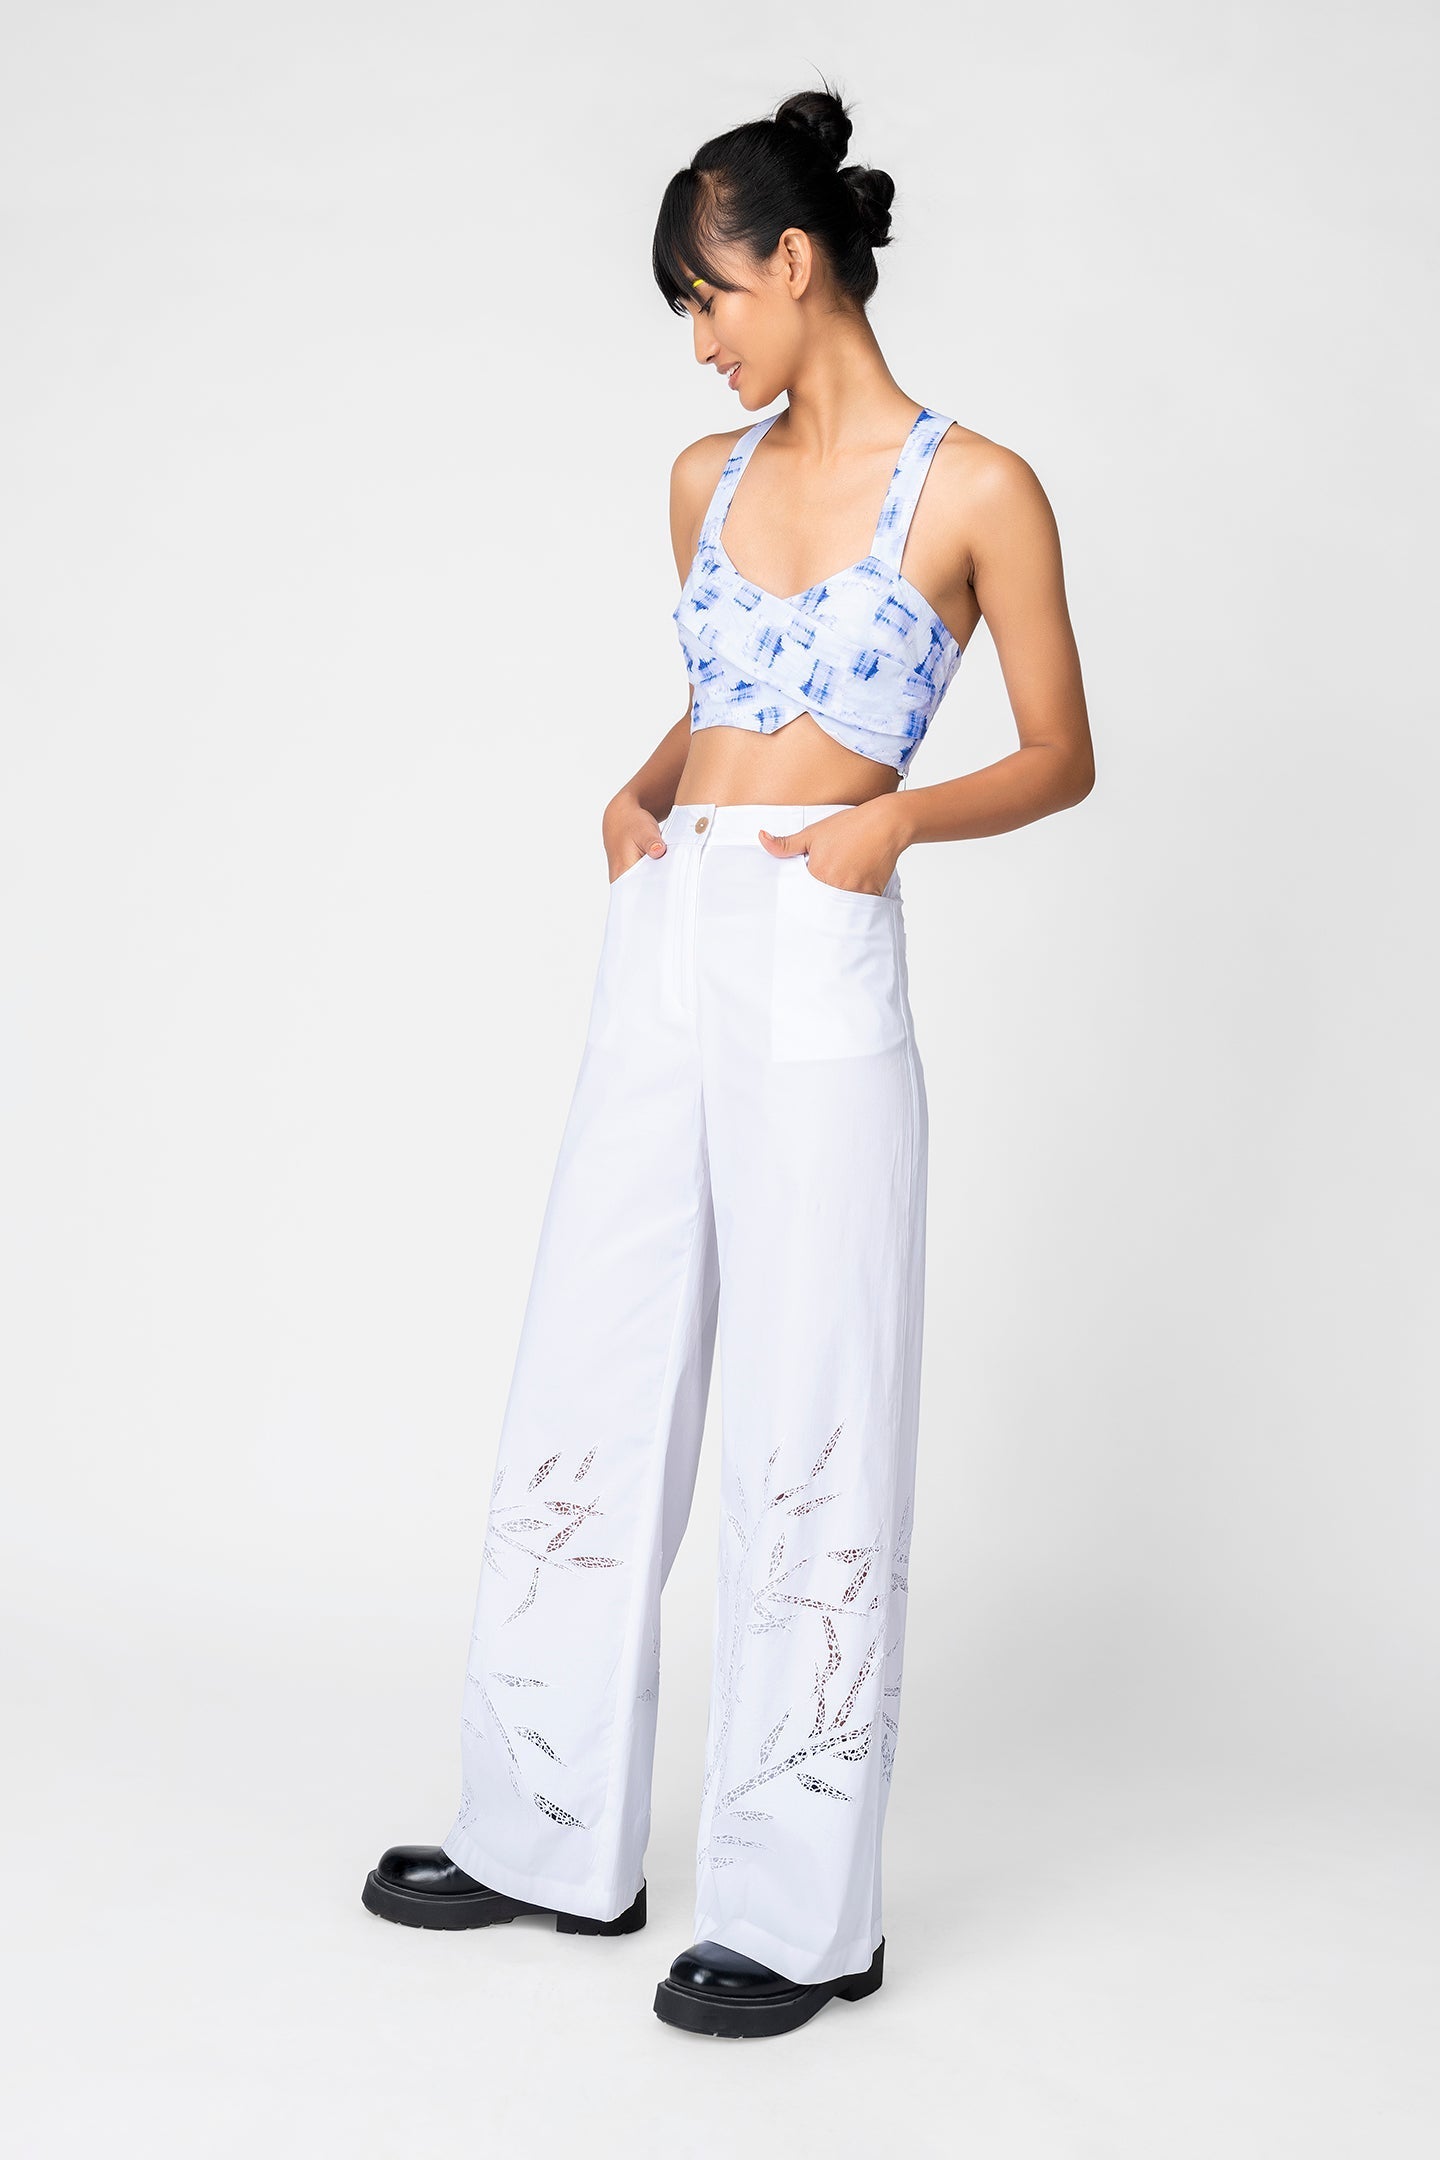 cutwork-embroidered-pants - Genes online store 2020